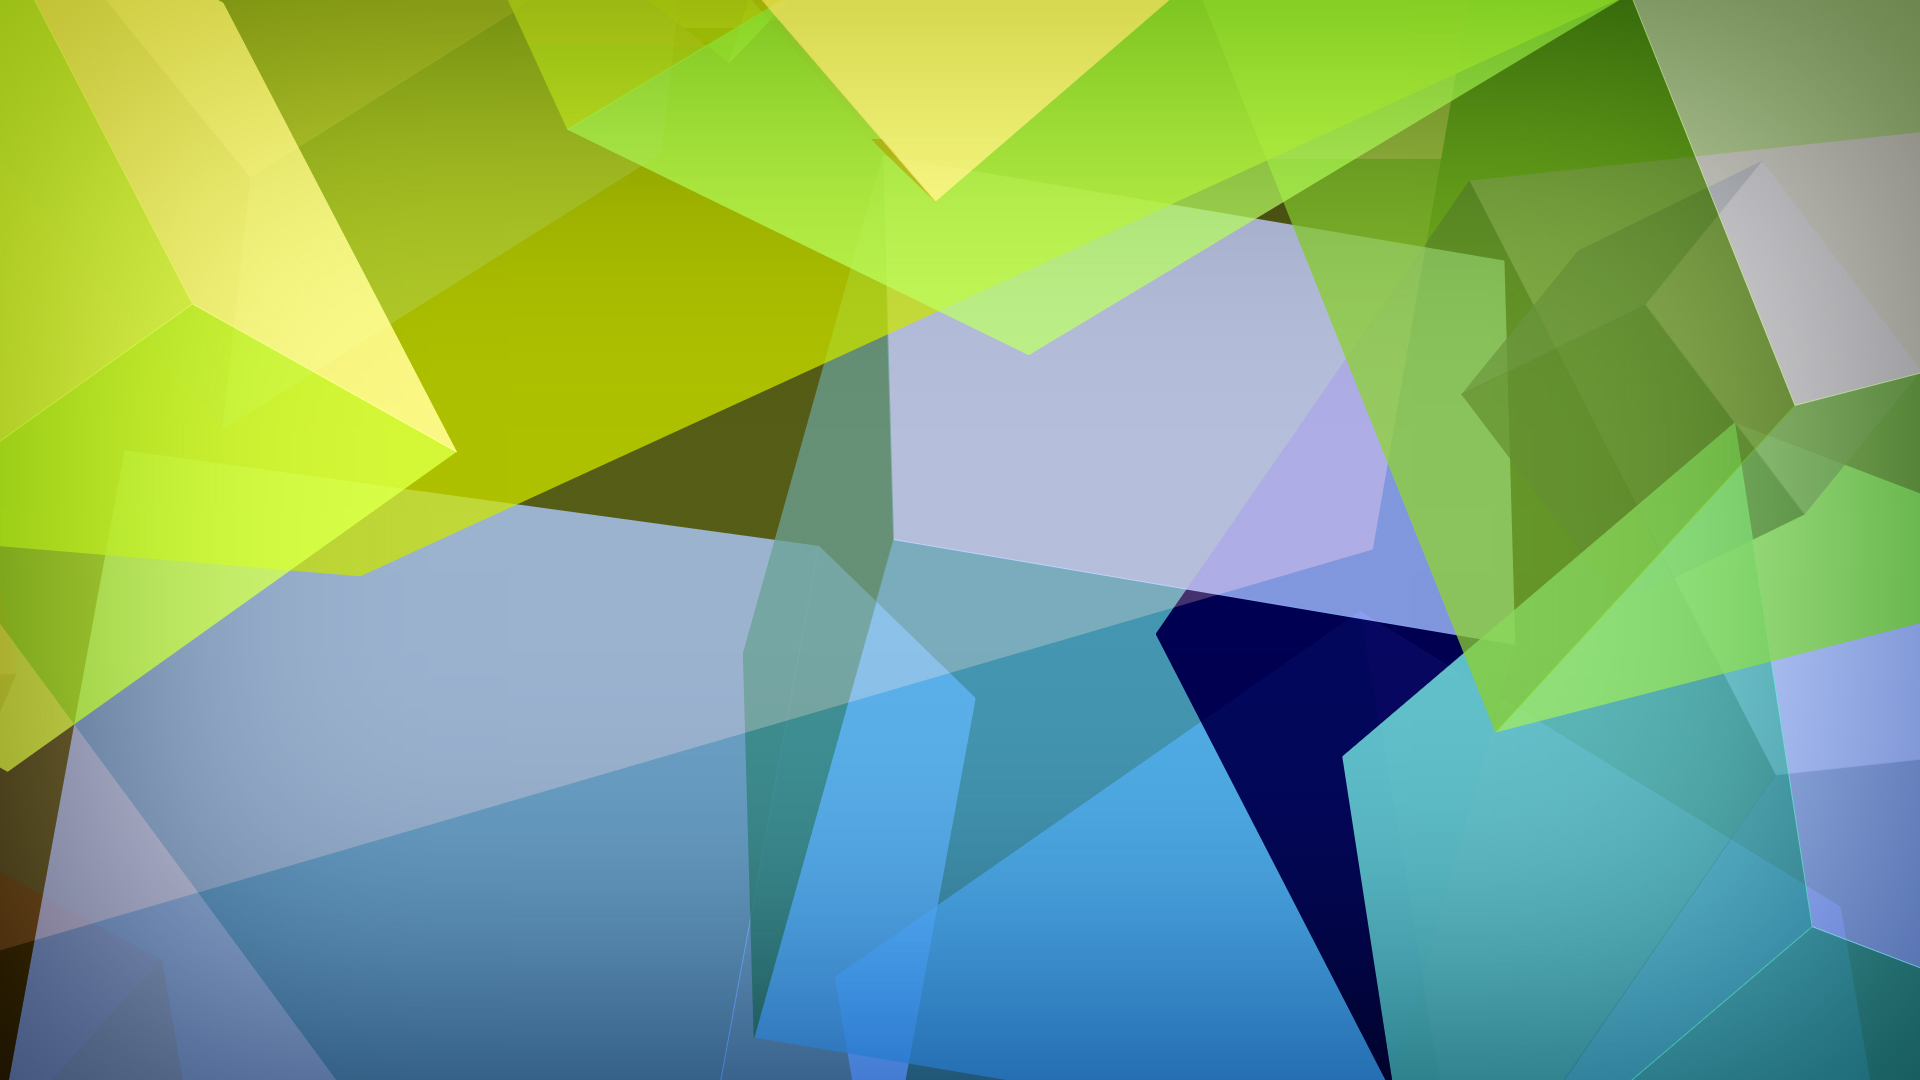 Abstract Geometric Shapes Backgrounds for Desktop